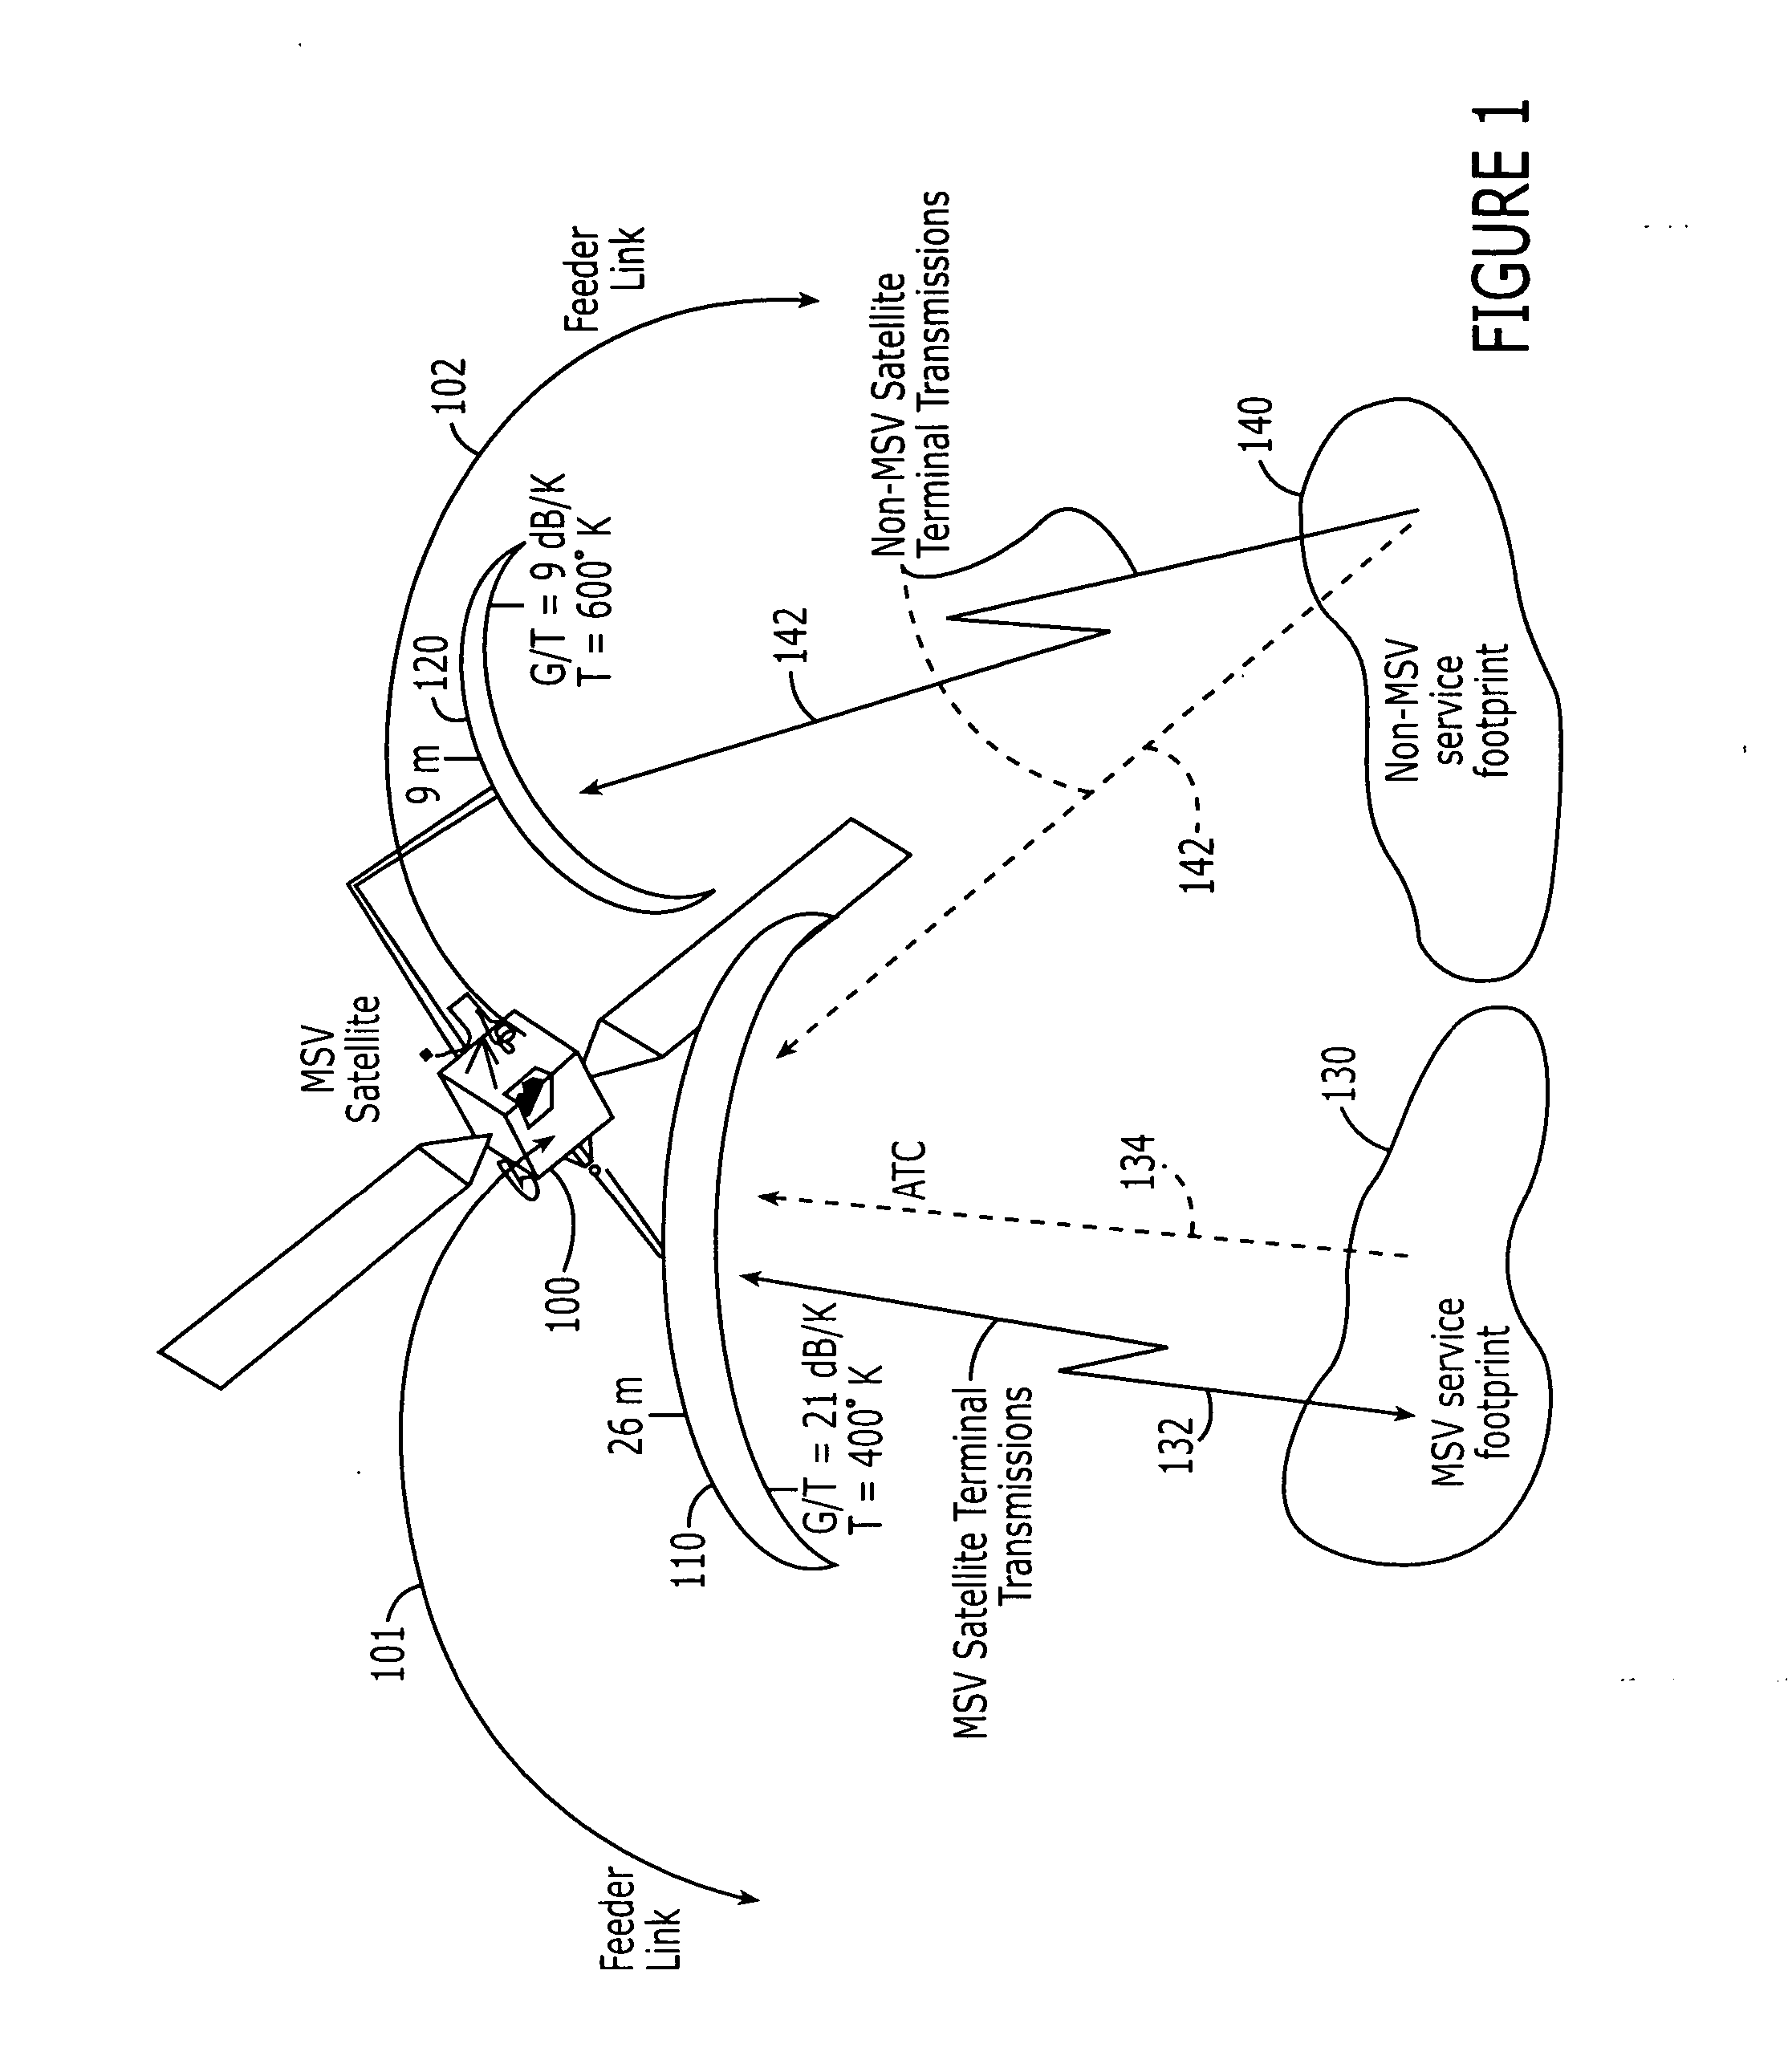 Intra-and/or inter-system interference reducing systems and methods for satellite communications systems